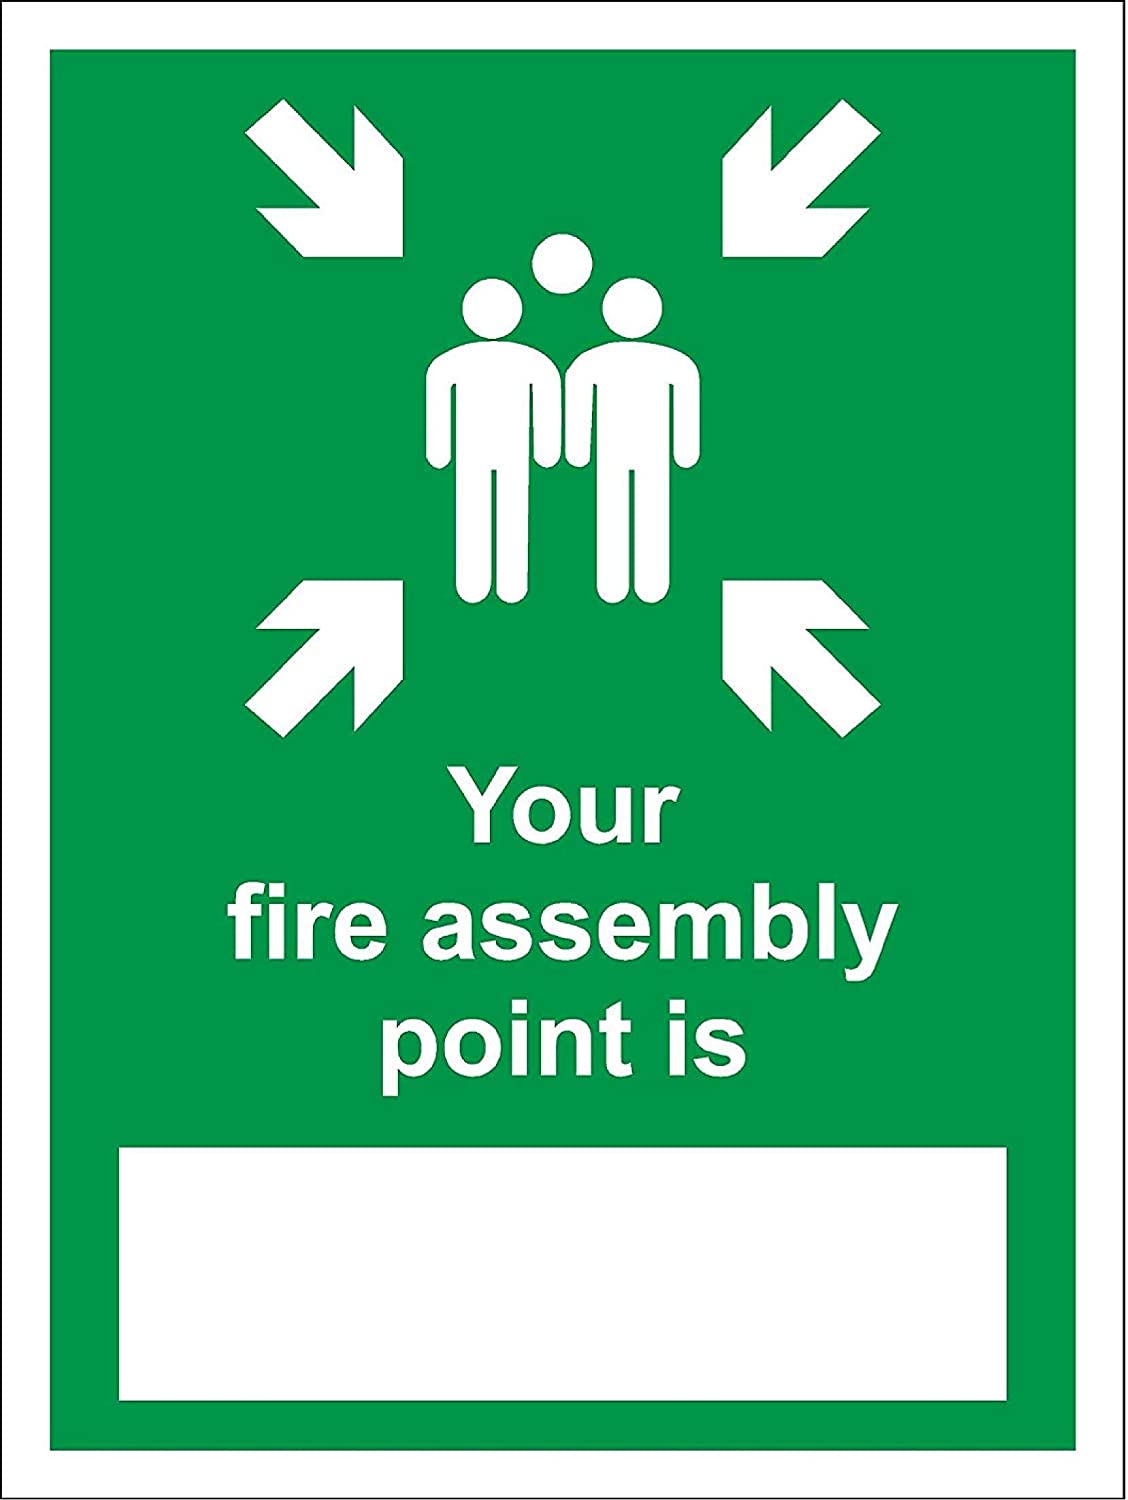 kpcm-your-fire-assembly-point-is-emergency-evacuation-made-in-the-uk